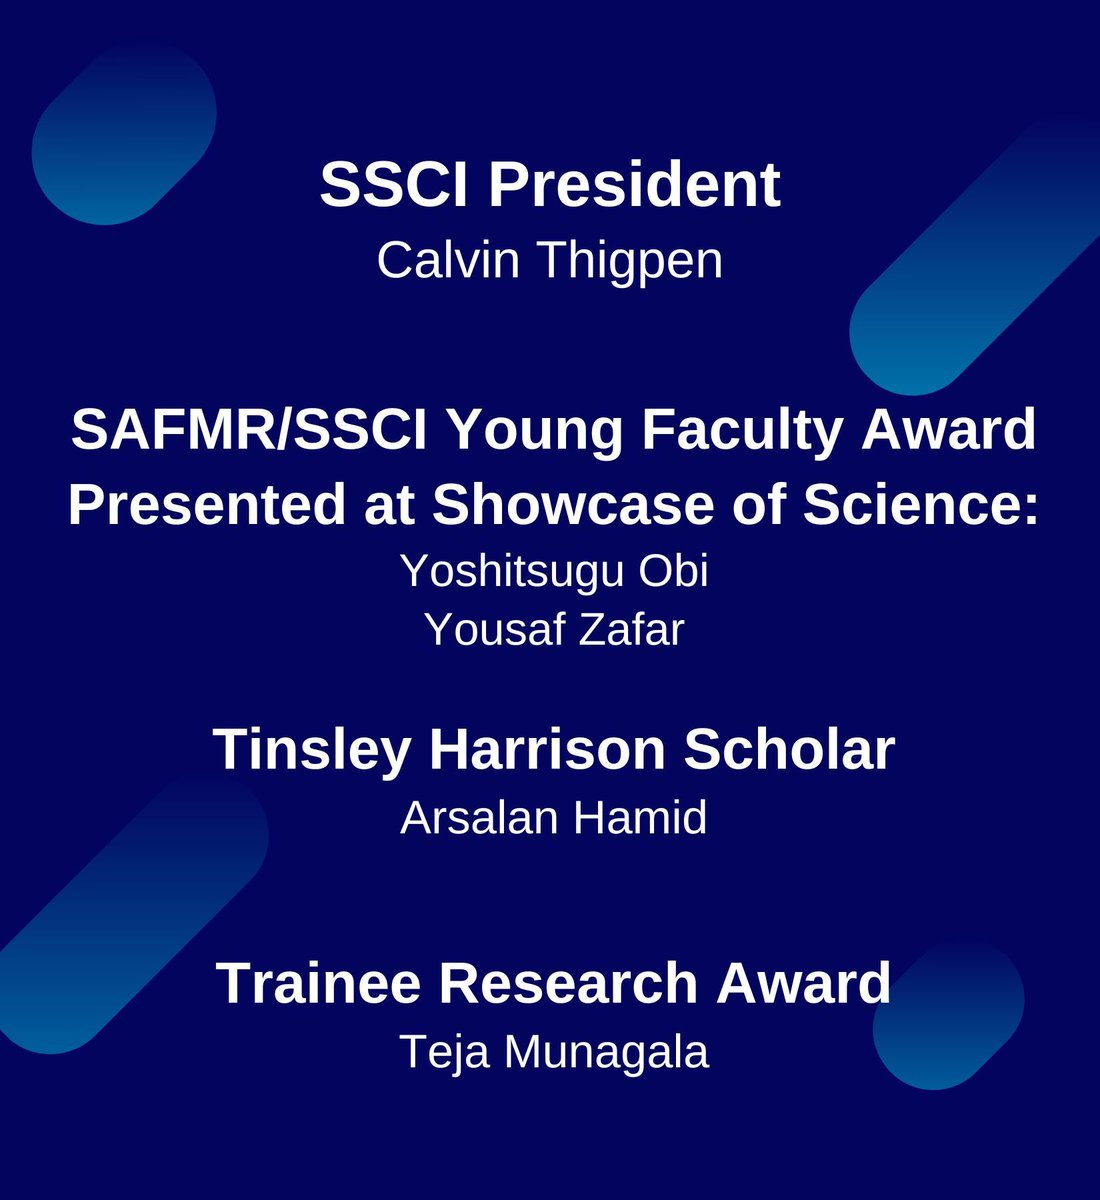 Congrats to our faculty and trainees who won awards or were recognized at the Southern Regional Meetings last month! buff.ly/4979BLP